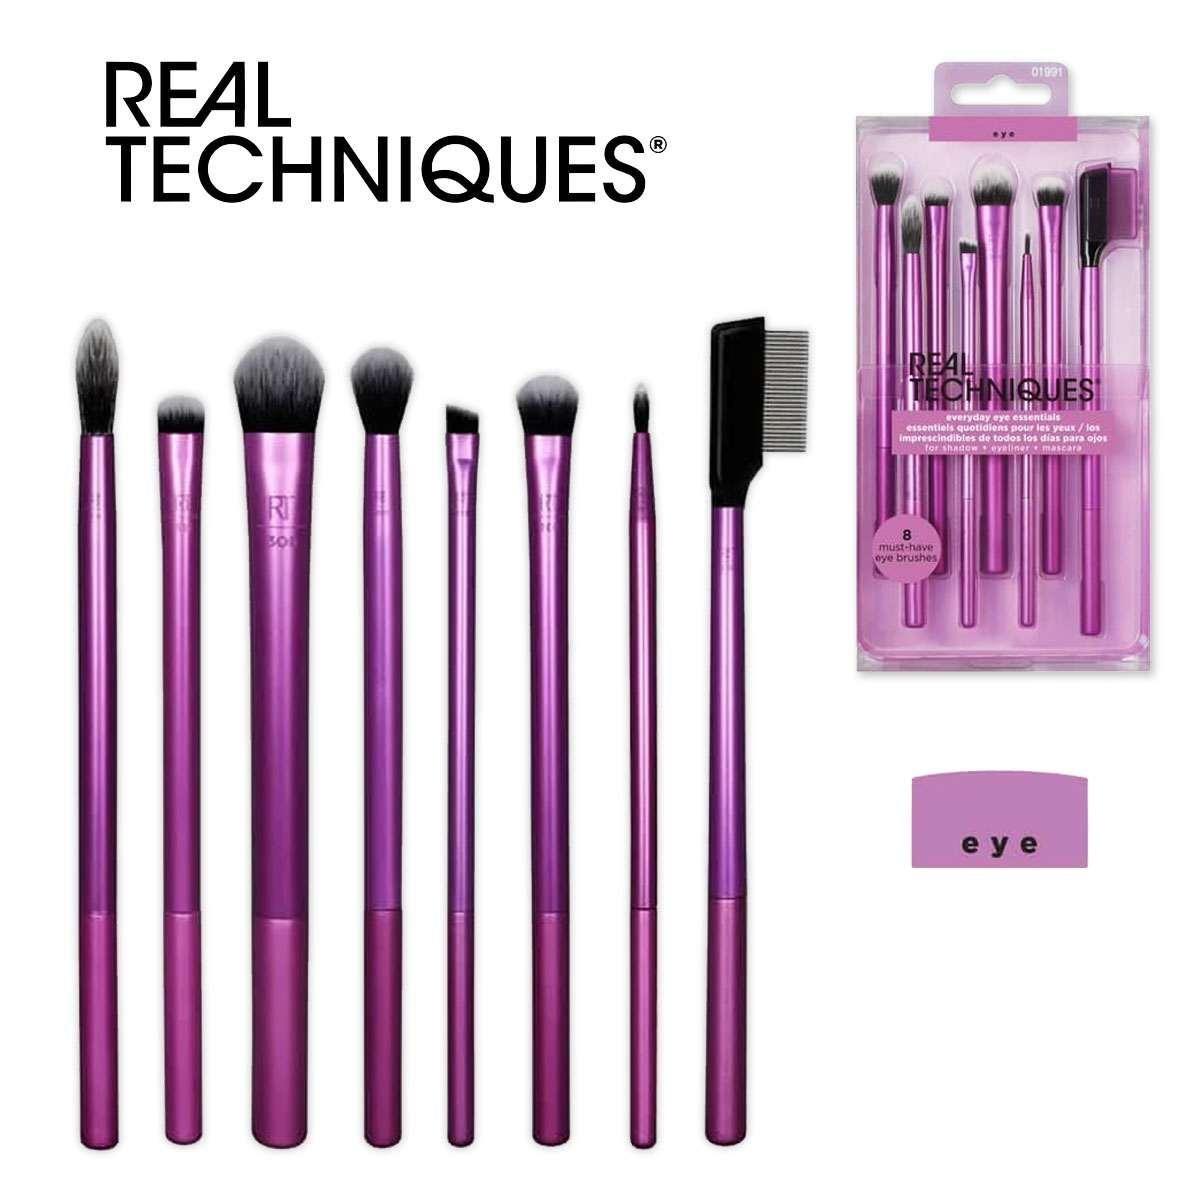 Real techniques Real techniques everyday eye essential set 8 pennelli occhi  40002 079625019919